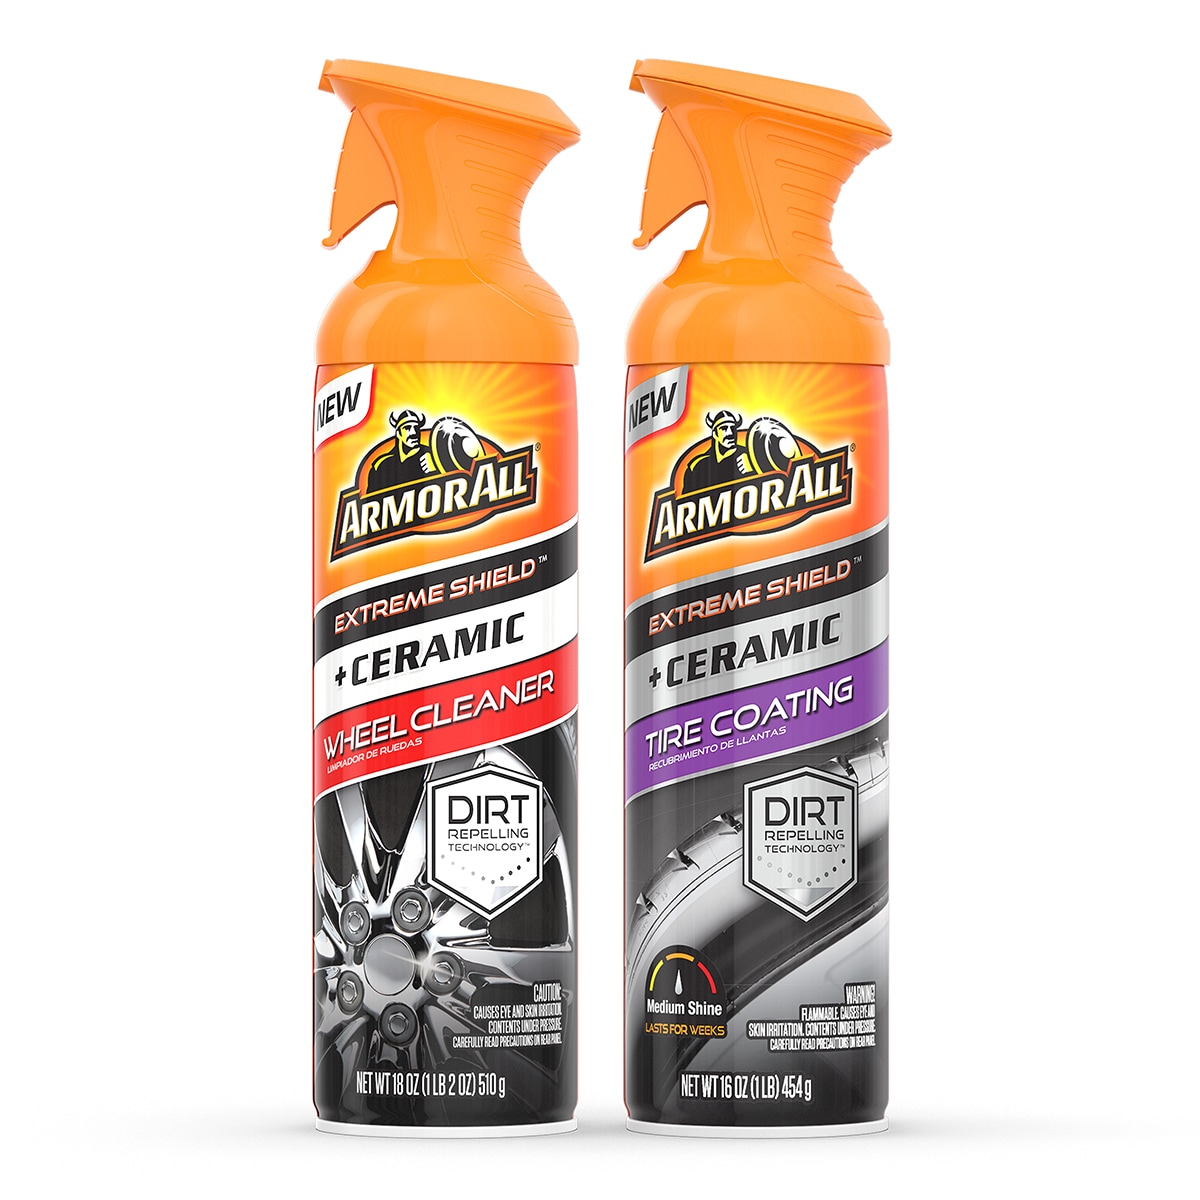 Armor All Extreme Tire Foam Protectant (18 oz.)